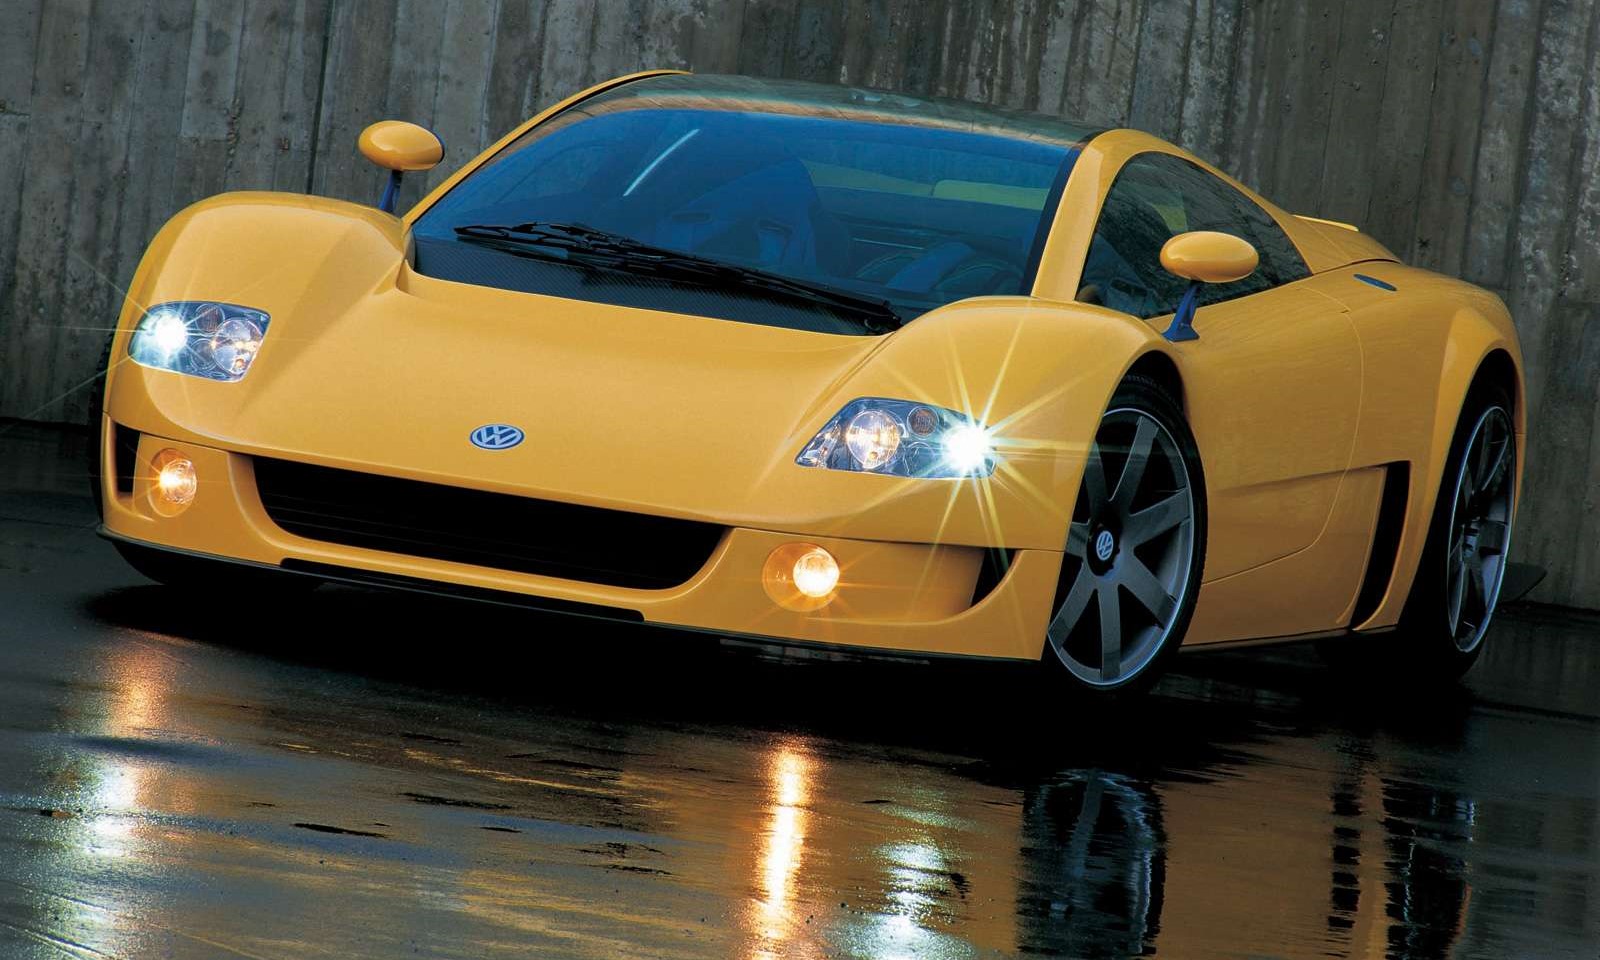 The Volkswagen W12 Concept Coupe from 1998.